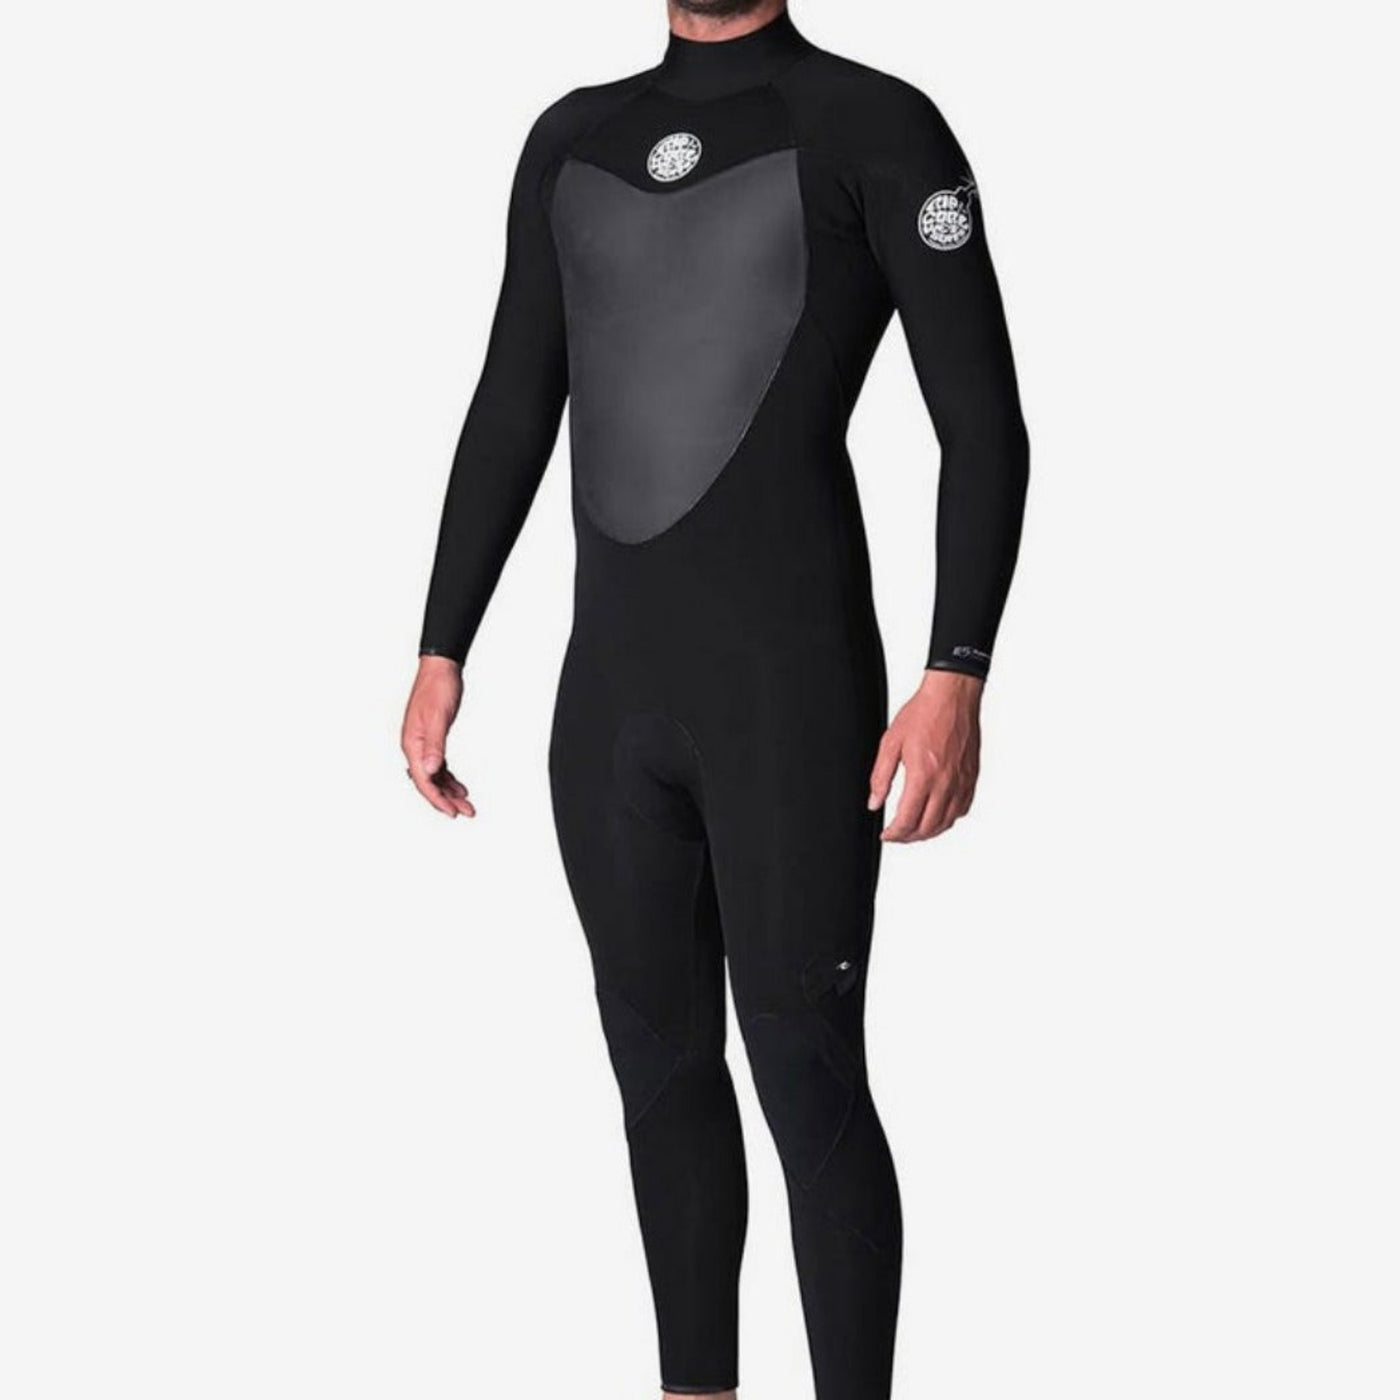 Rip Curl Flashbomb 3/2mm Steamer Wetsuit - Back Zip